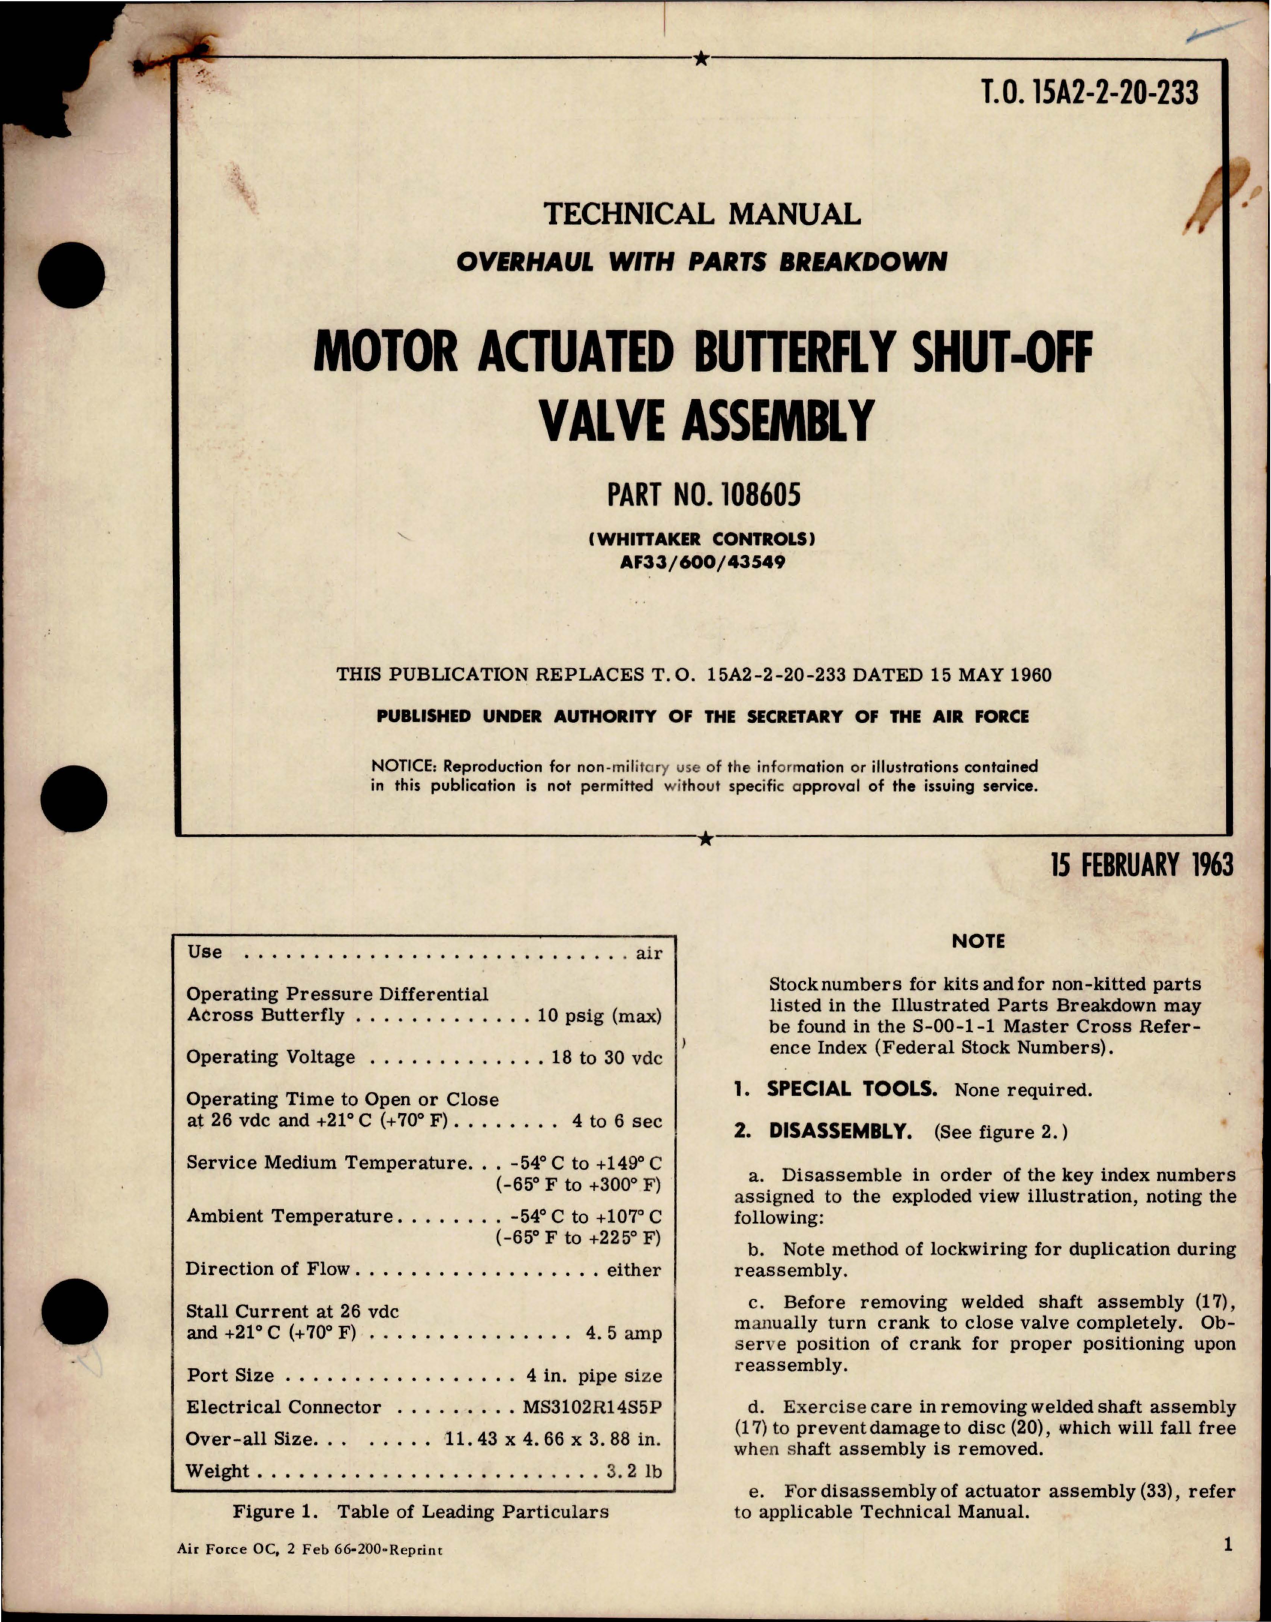 Sample page 1 from AirCorps Library document: Overhaul Manual with Parts Breakdown for Motor Actuated Butterfly Shut-Off Valve Assembly